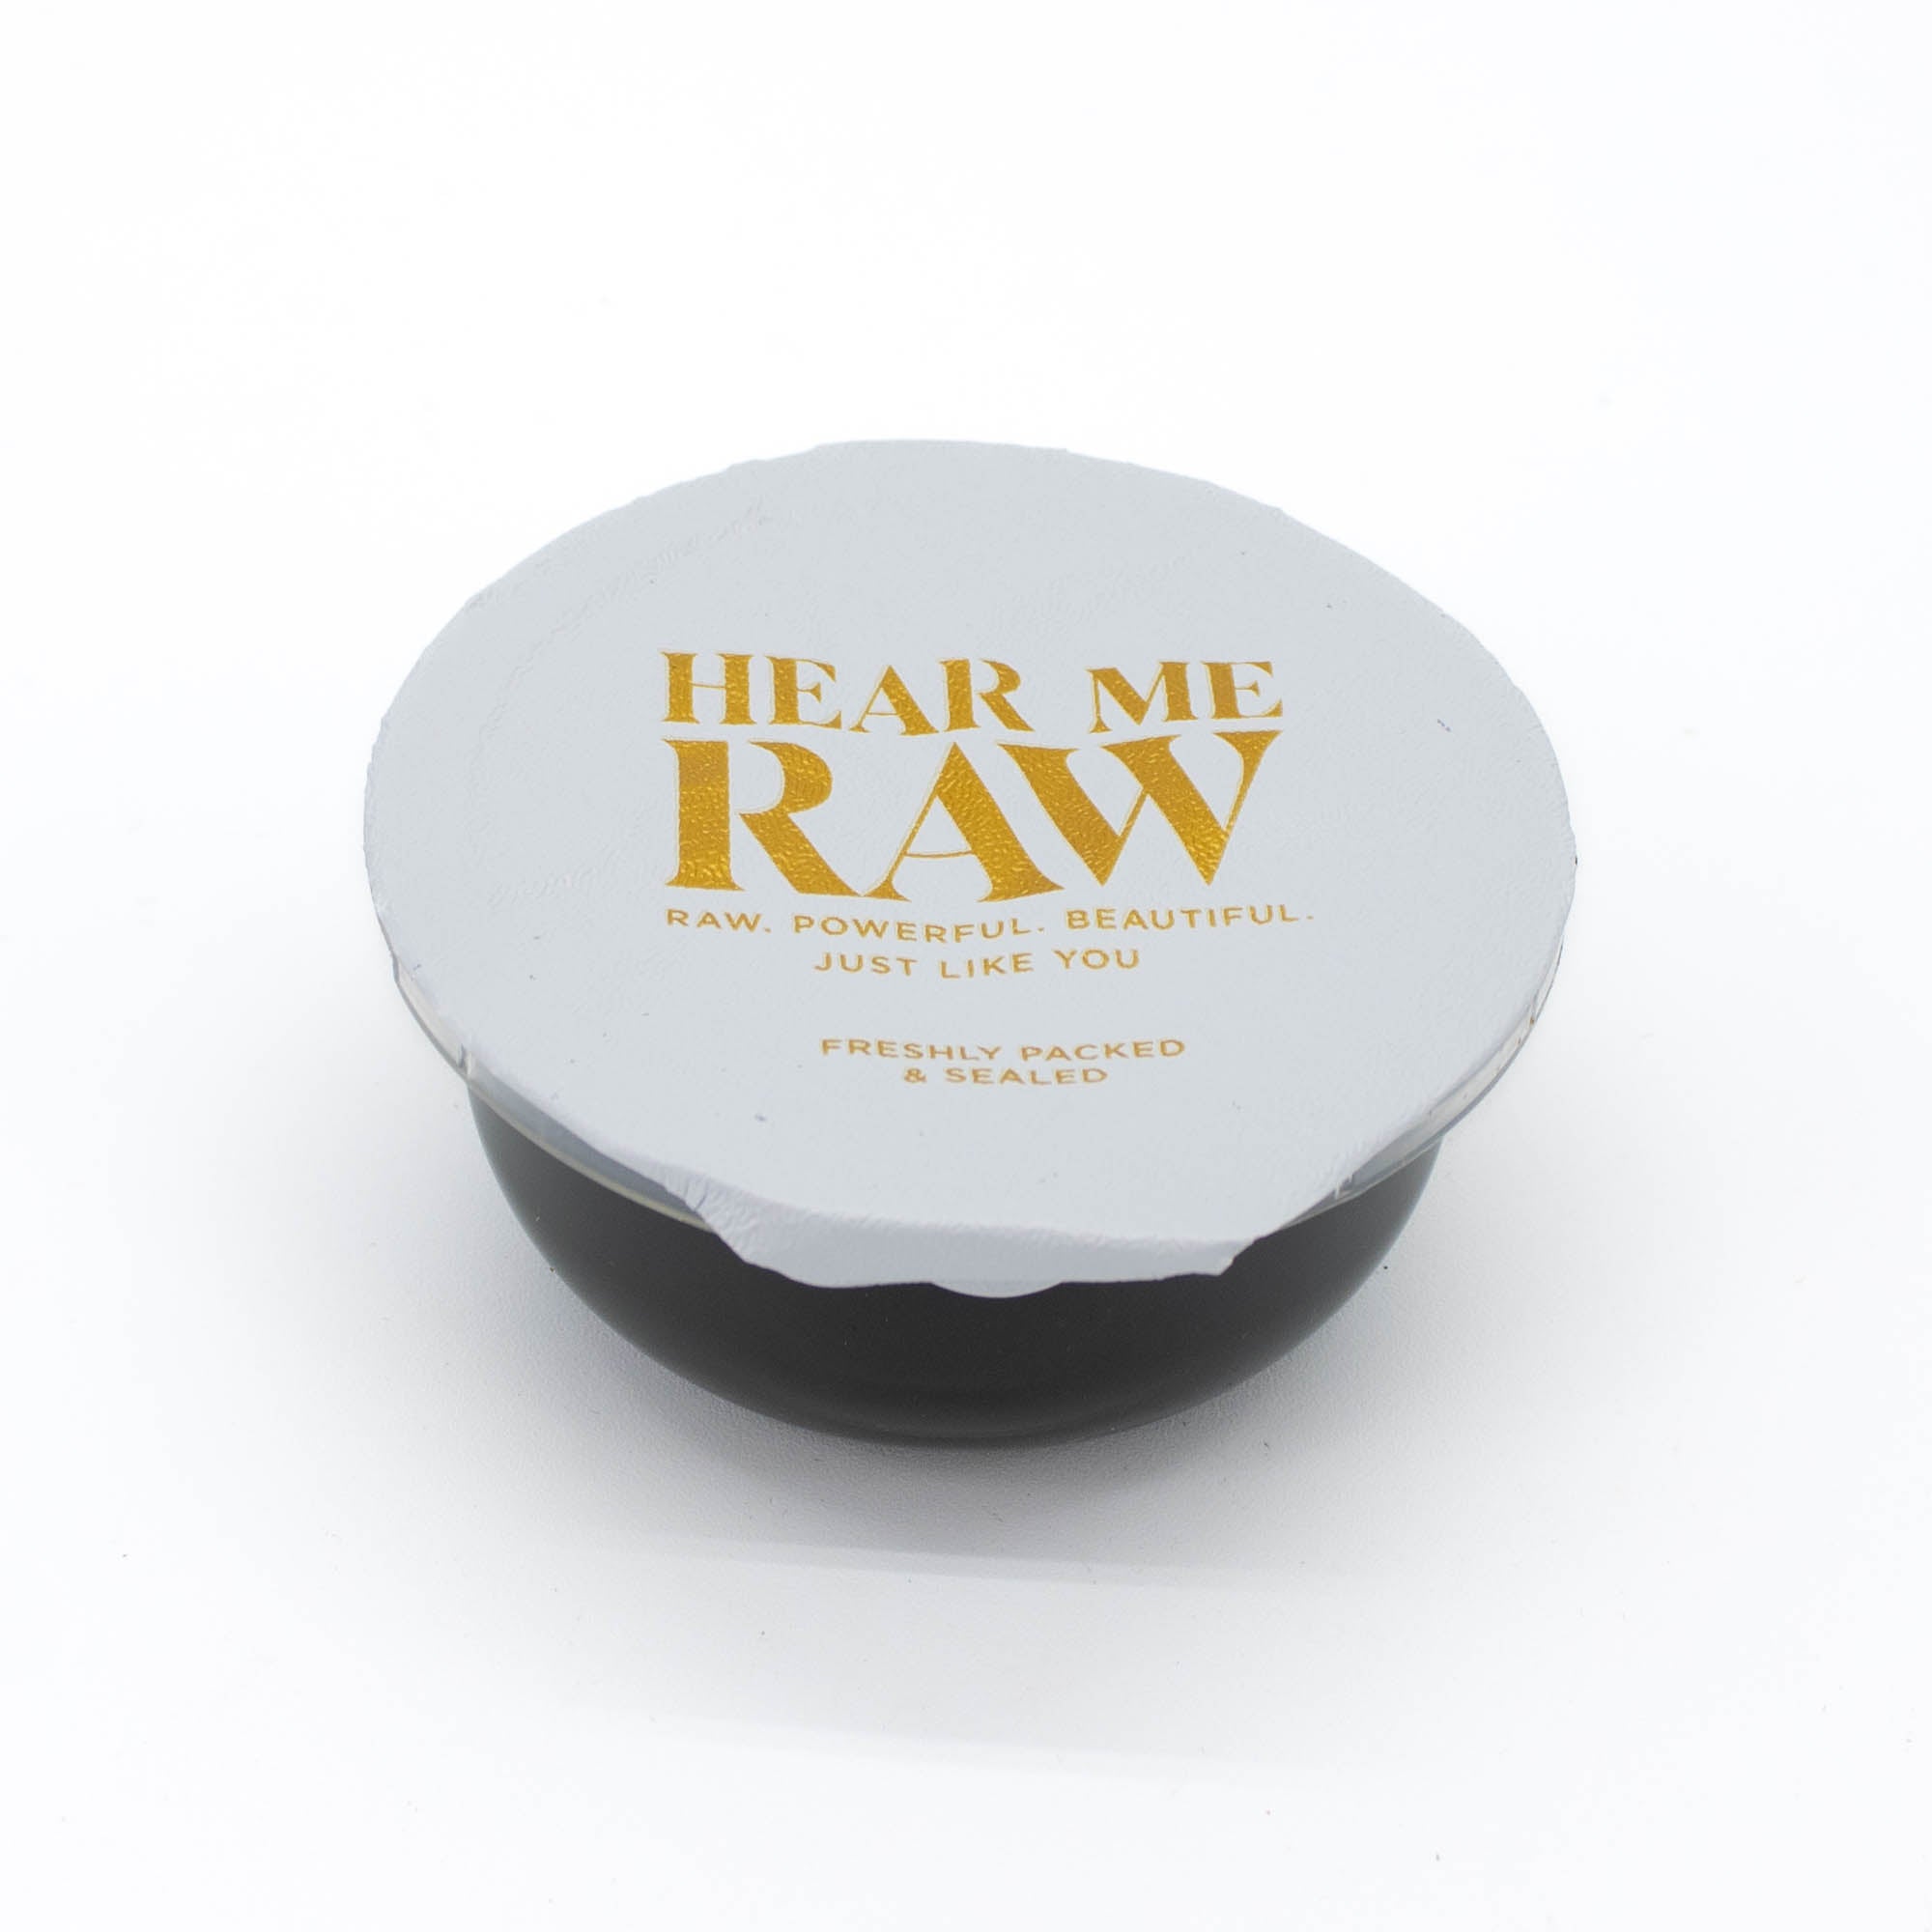 HEAR ME RAW The Brightener with Chlorophyll+ REFILL POD 2.5oz - Imperfect Box